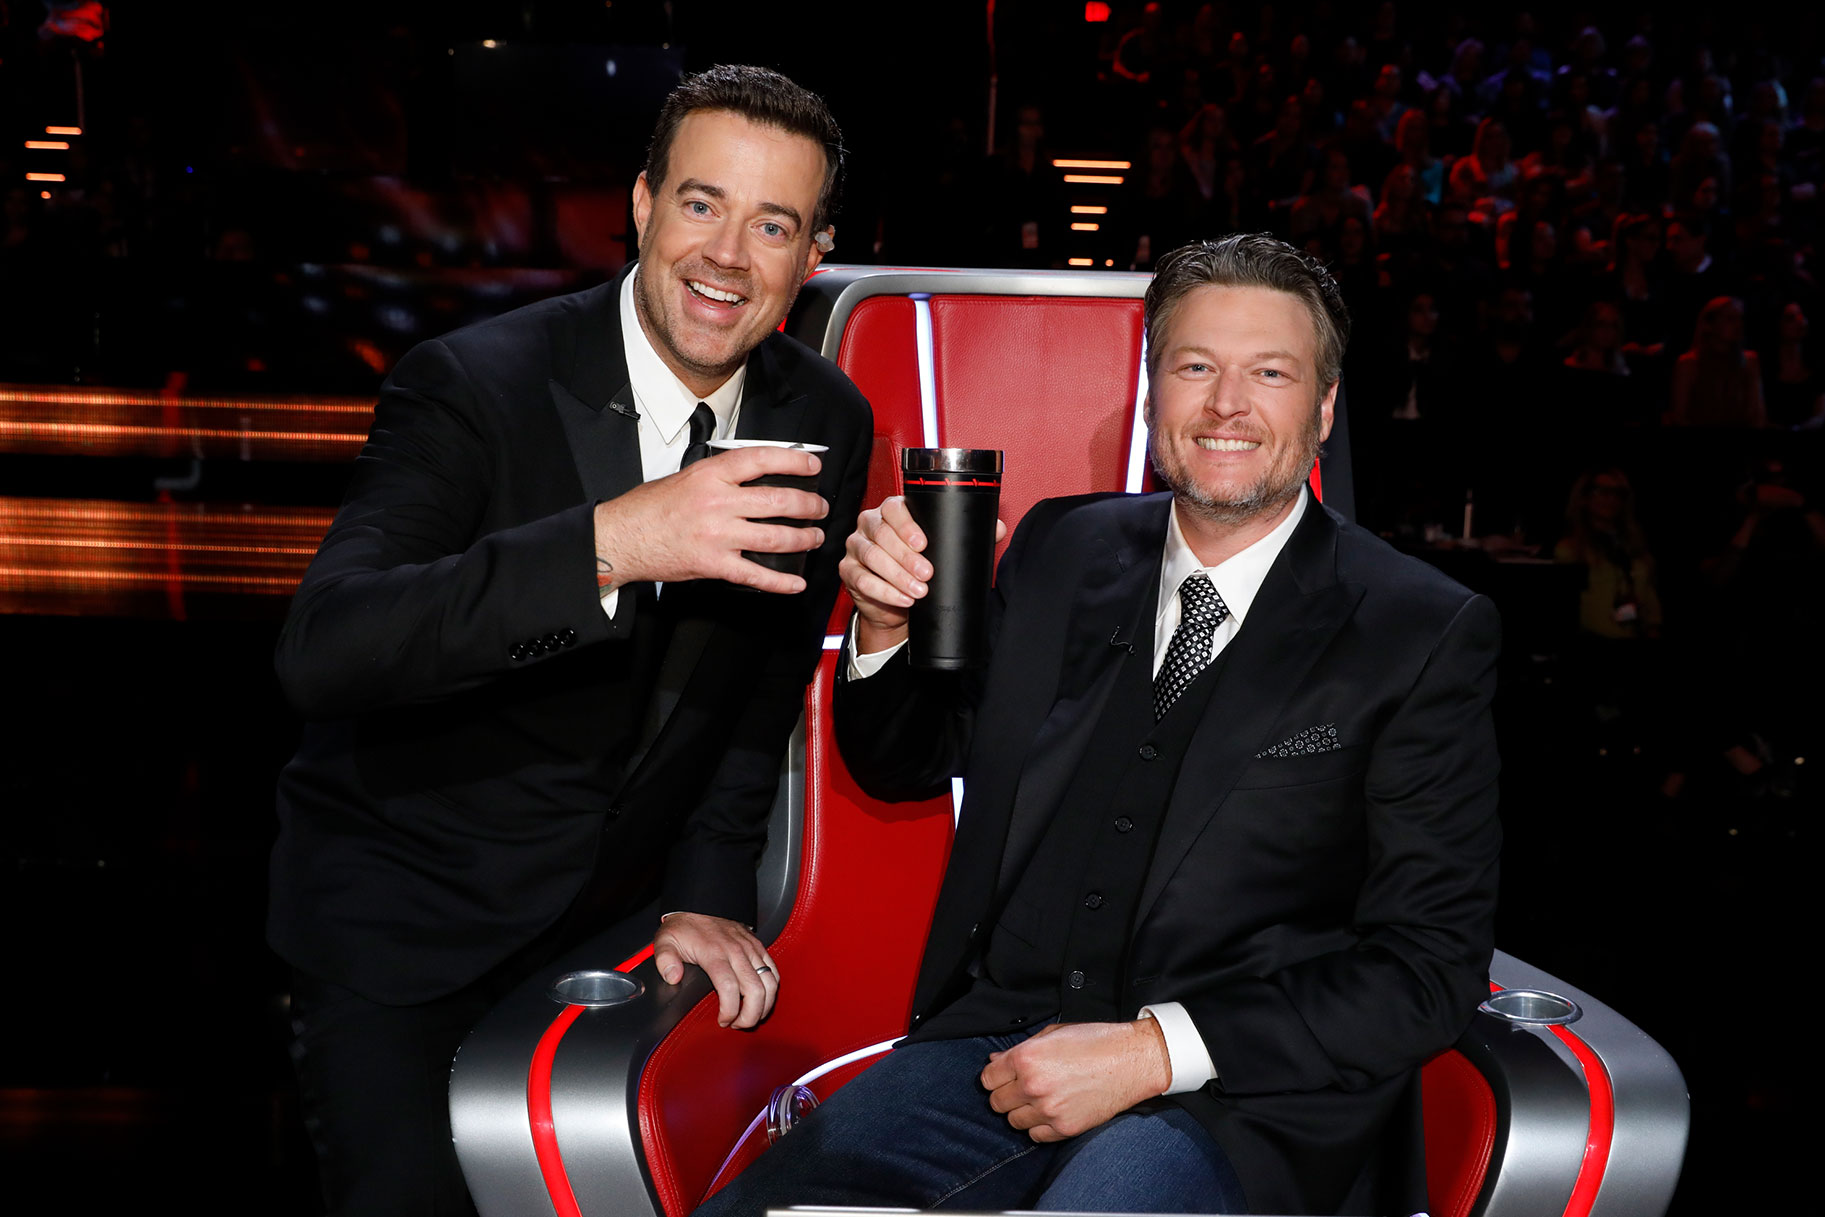 Carson Daly and Blake Shelton smiling and posing on the set of 'The Voice'